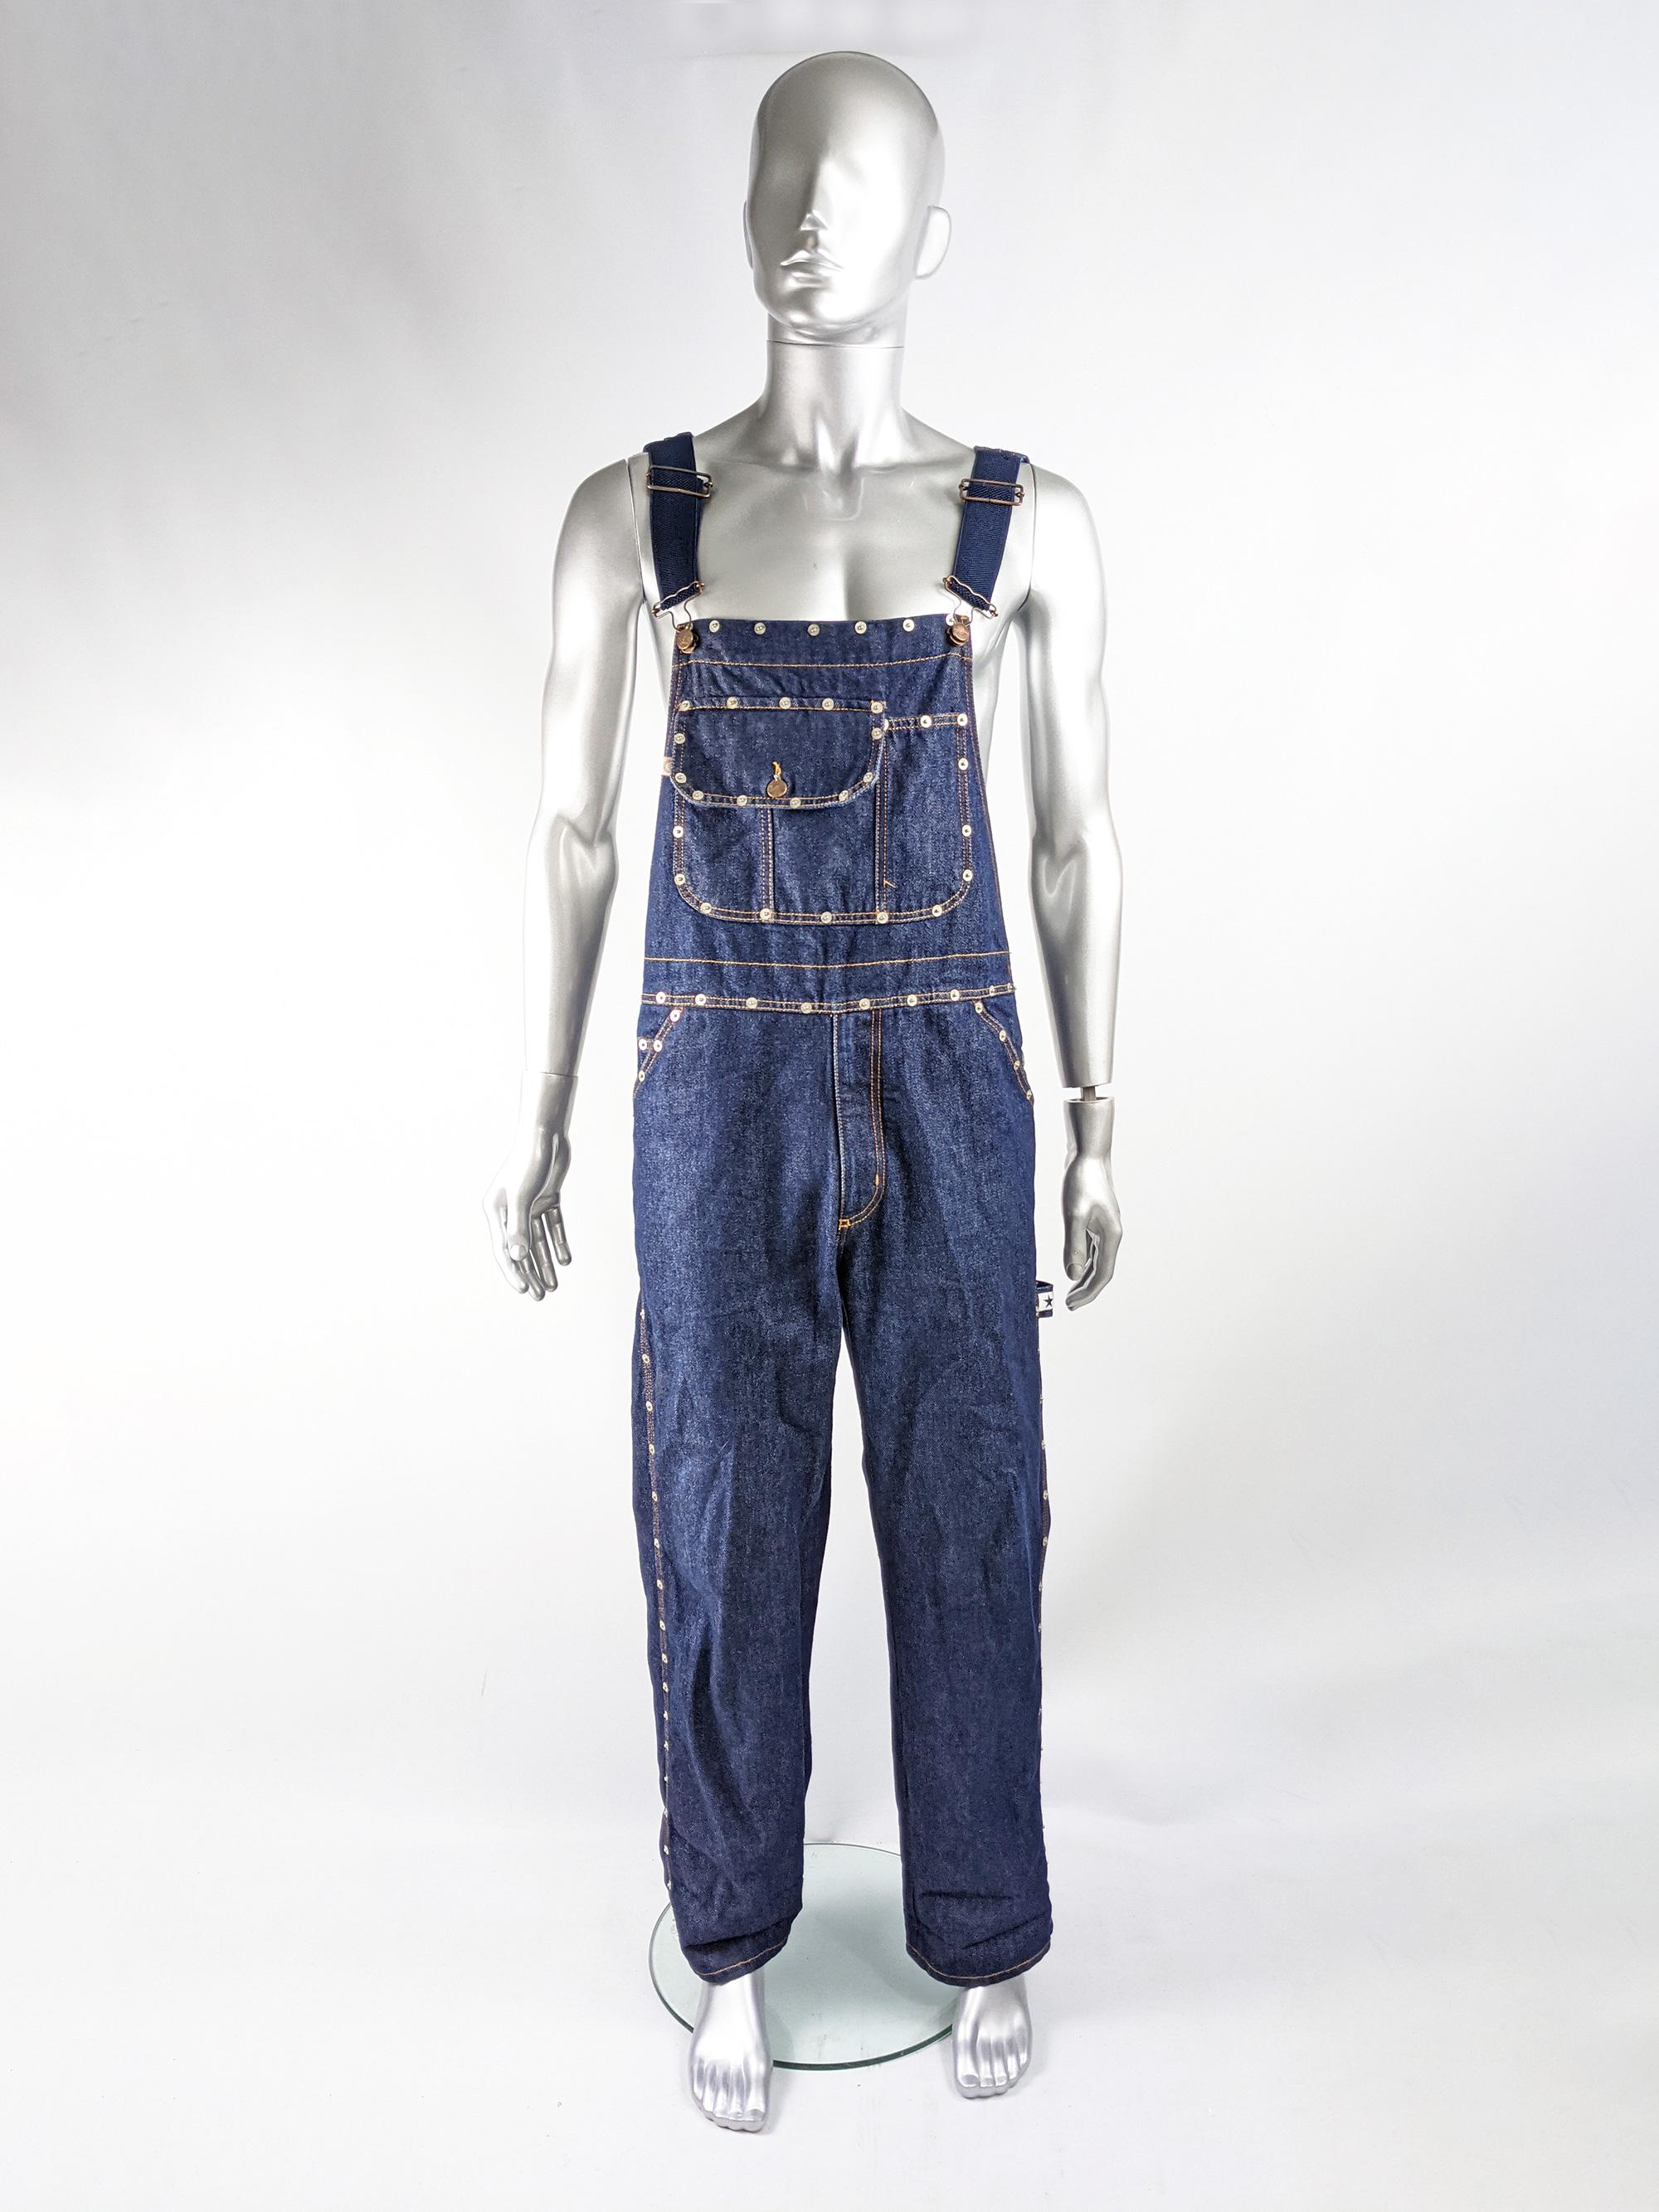 An amazing pair of vintage dungarees / overalls by luxury Italian label, Fiorucci. In a blue denim with stud details throughout, Fiorucci branding on the straps and studs, multiple pockets and dark blue knit straps. 

Size: Marked to fit 32” waist